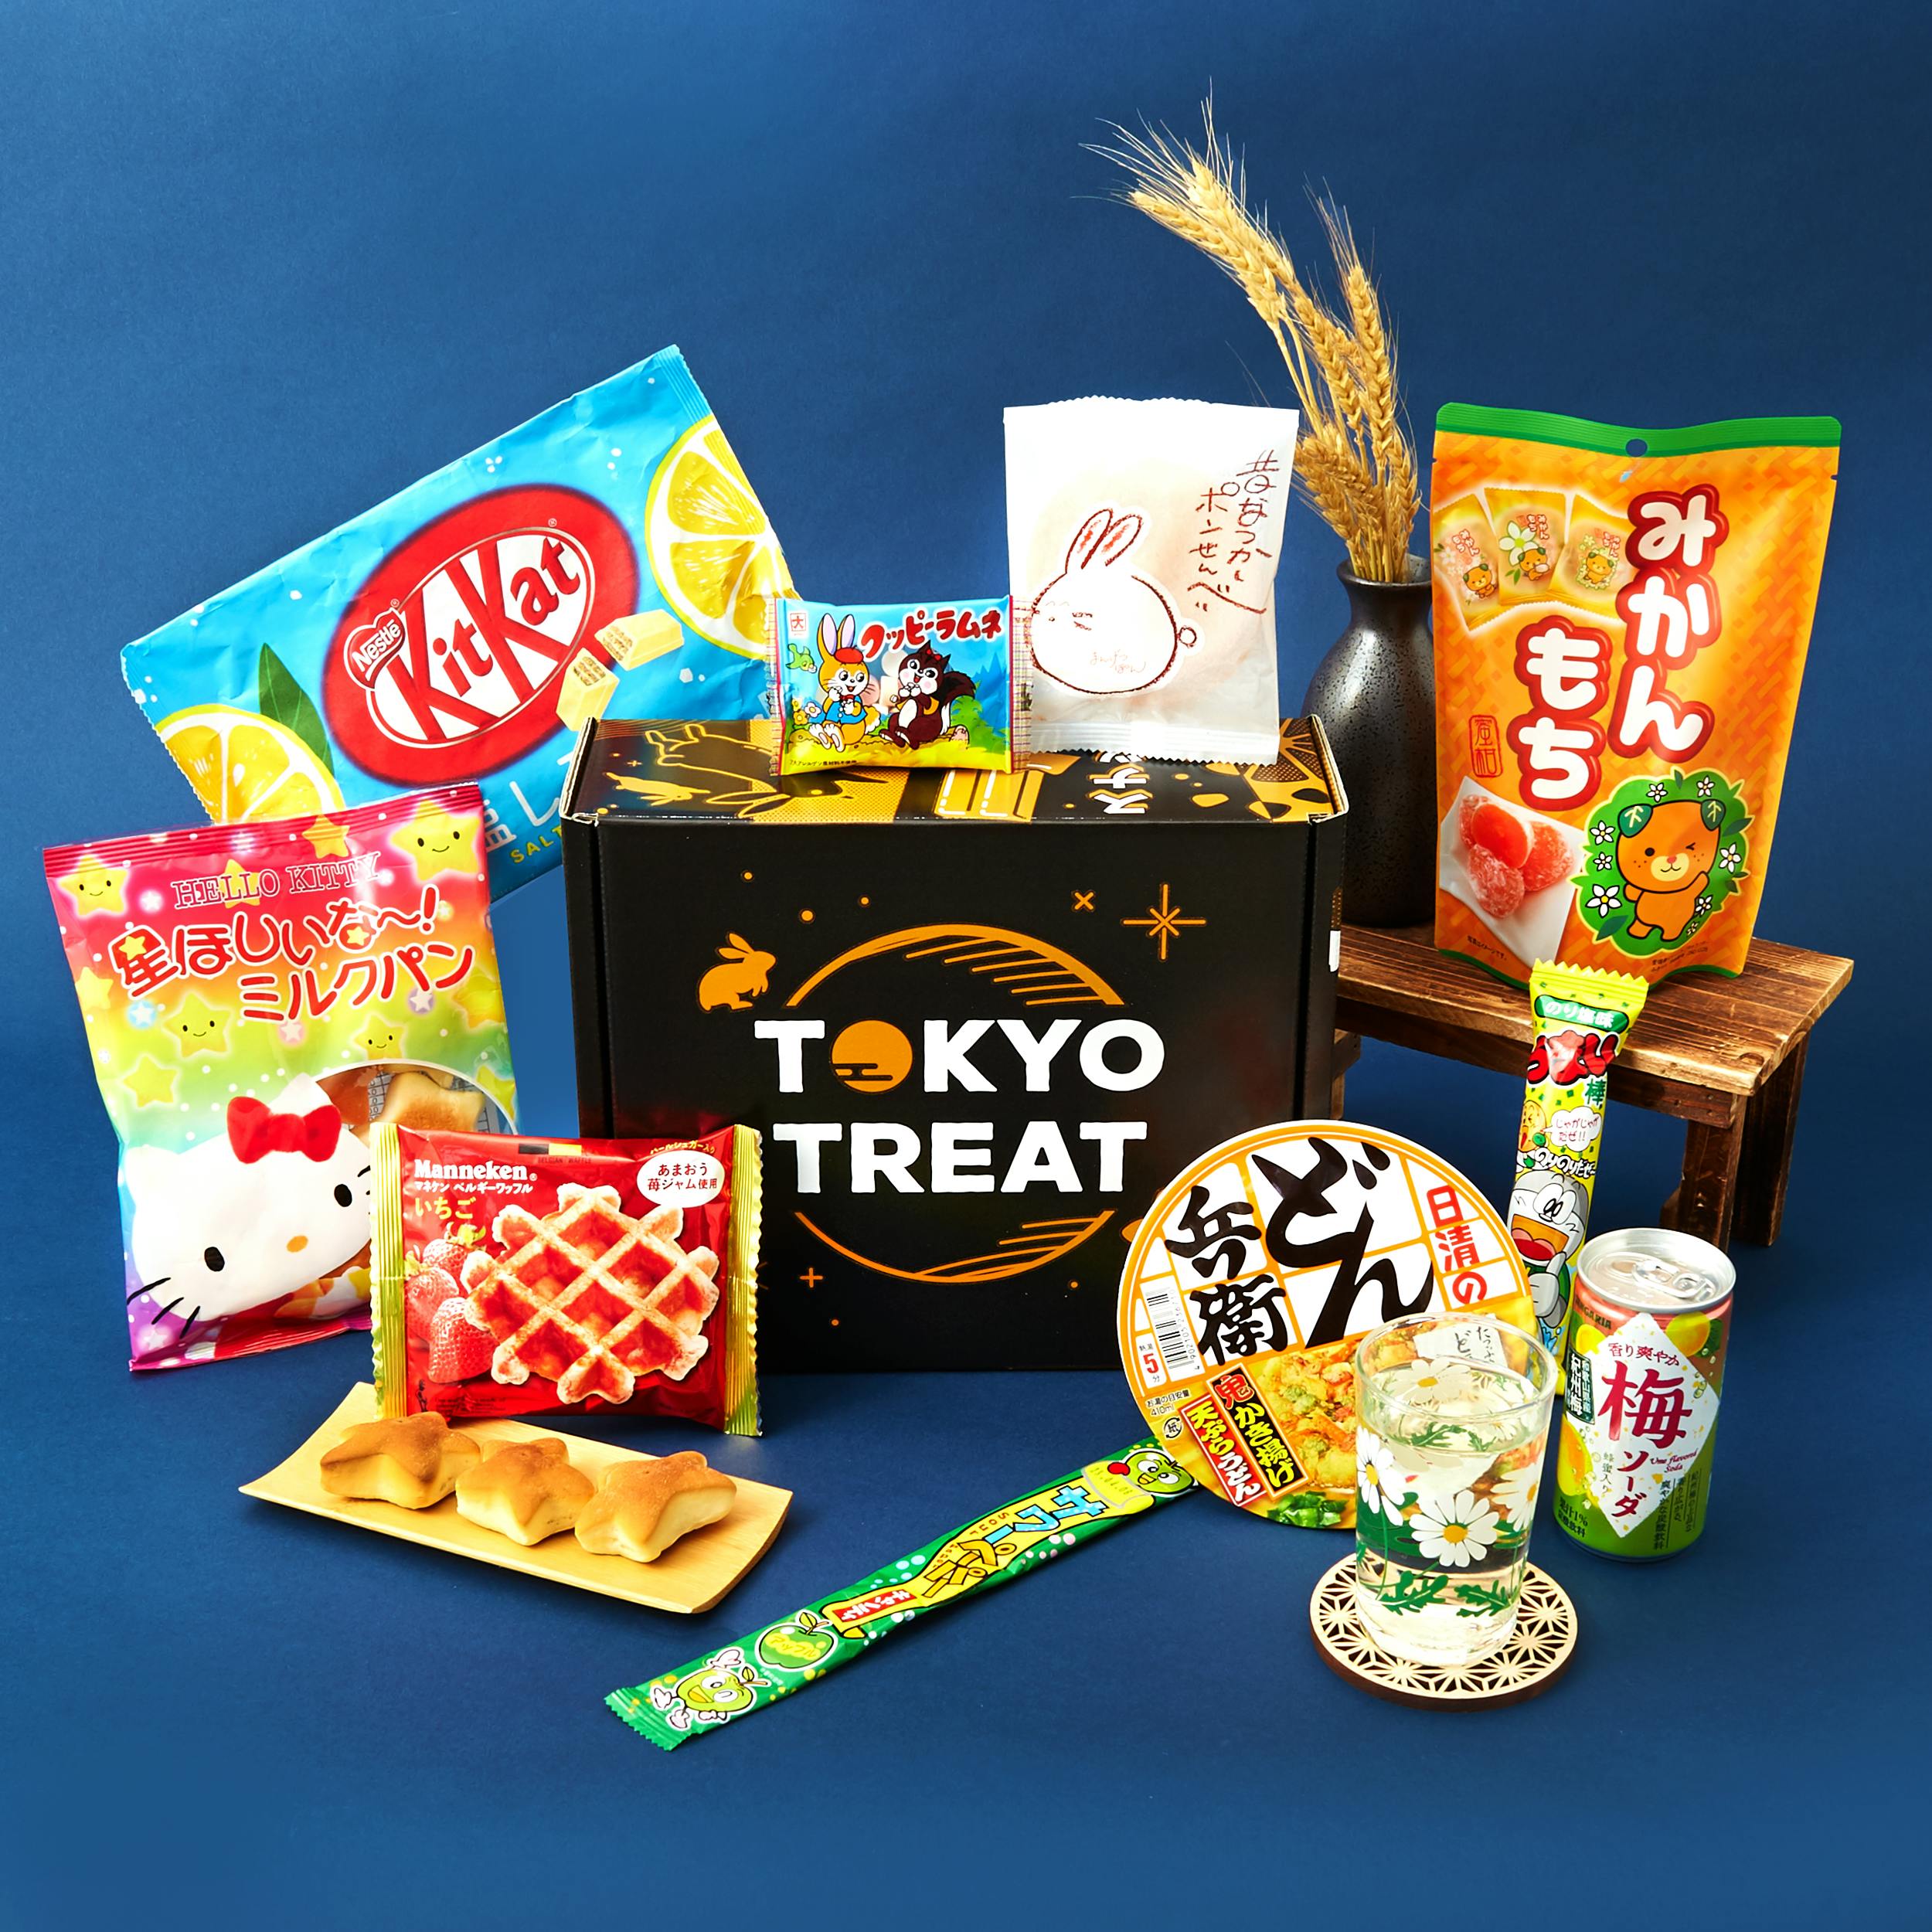 Tokyo Treat Review September 2018: Fruity Flavors